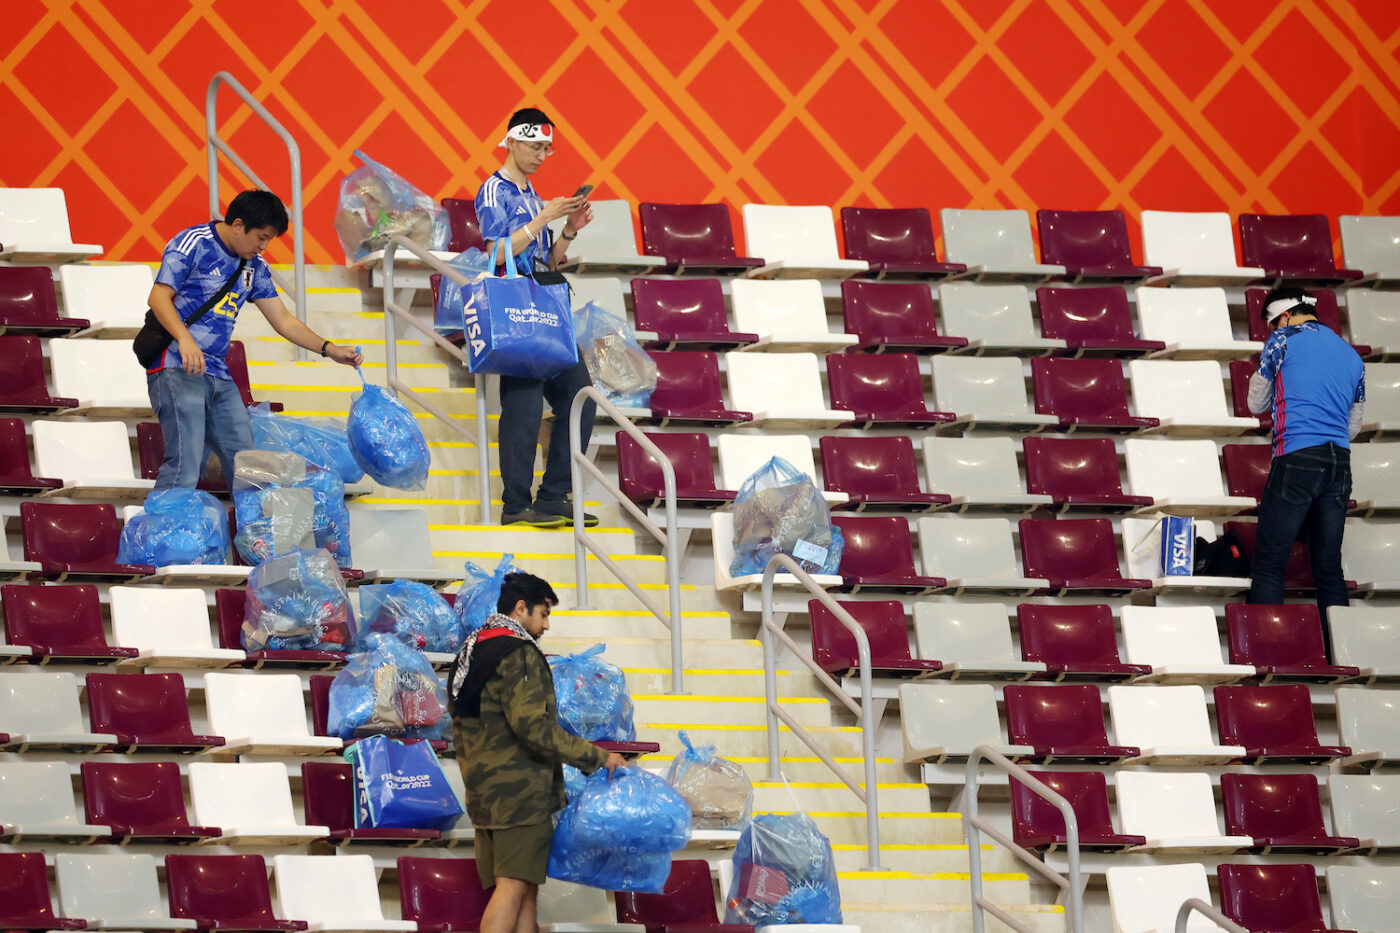 Japan World Cup Fans Stay Behind To Clean Up 'Grubby' German Fans' Mess ...